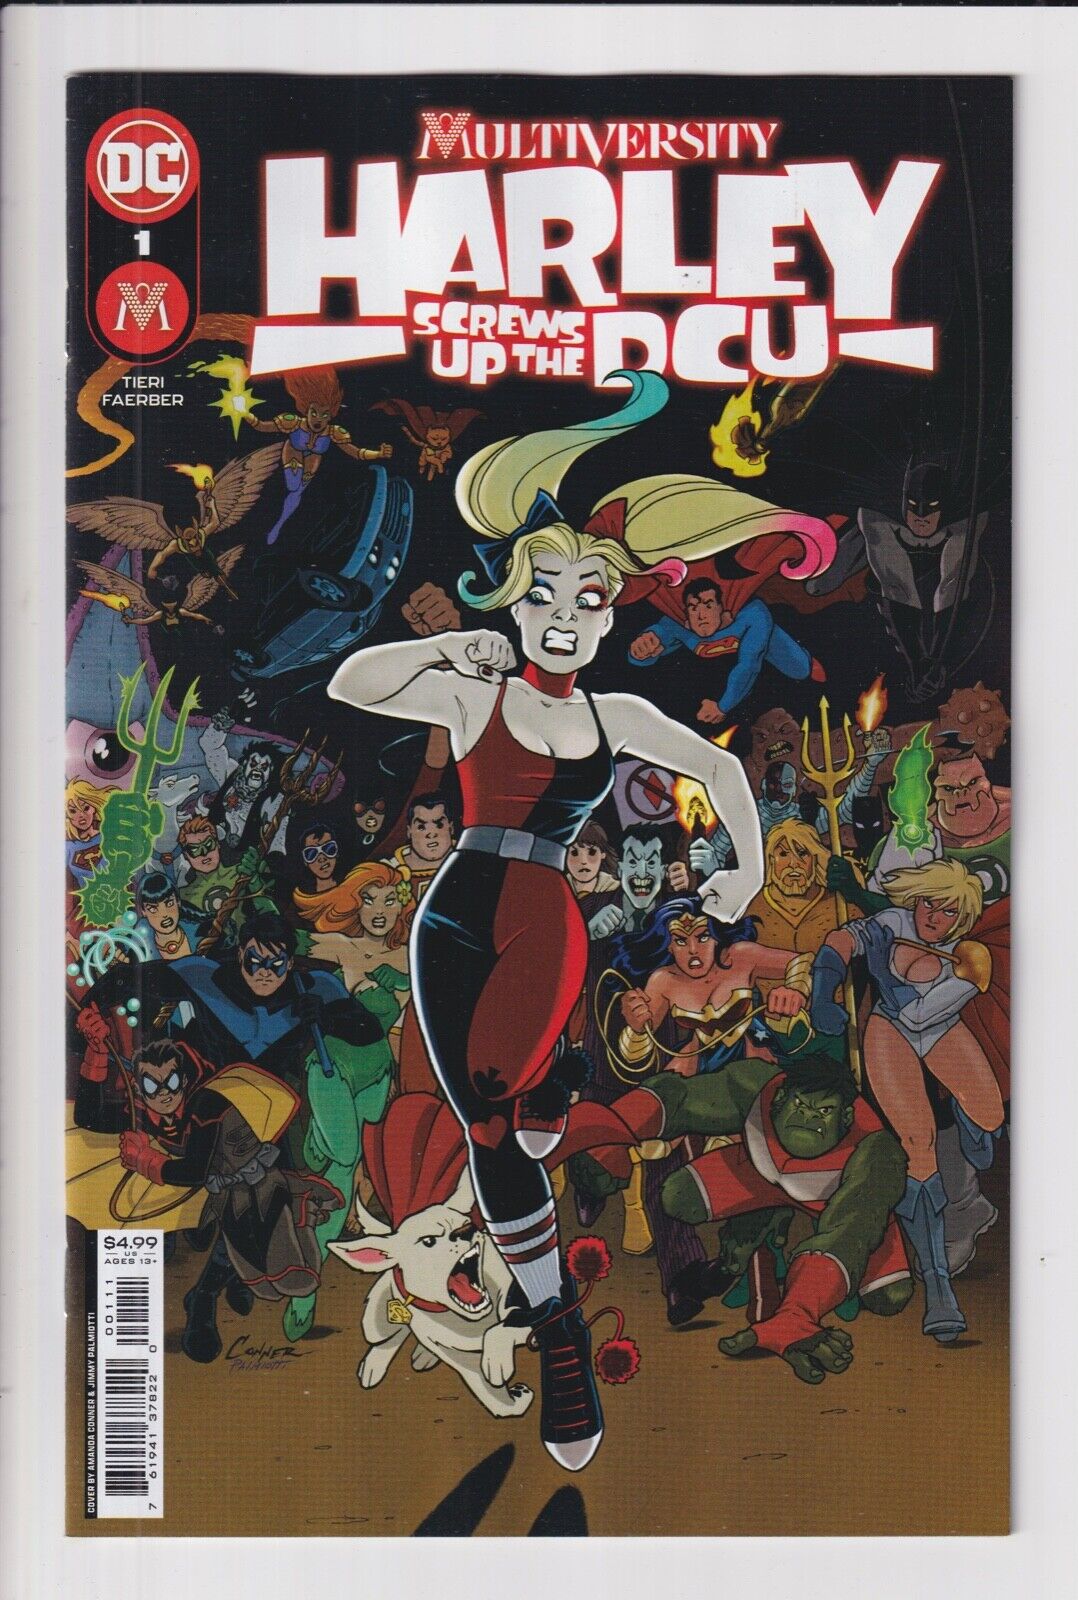 MULTIVERSITY: HARLEY SCREWS UP THE DCU 1-6 NM DC comics sold SEPARATELY you PICK